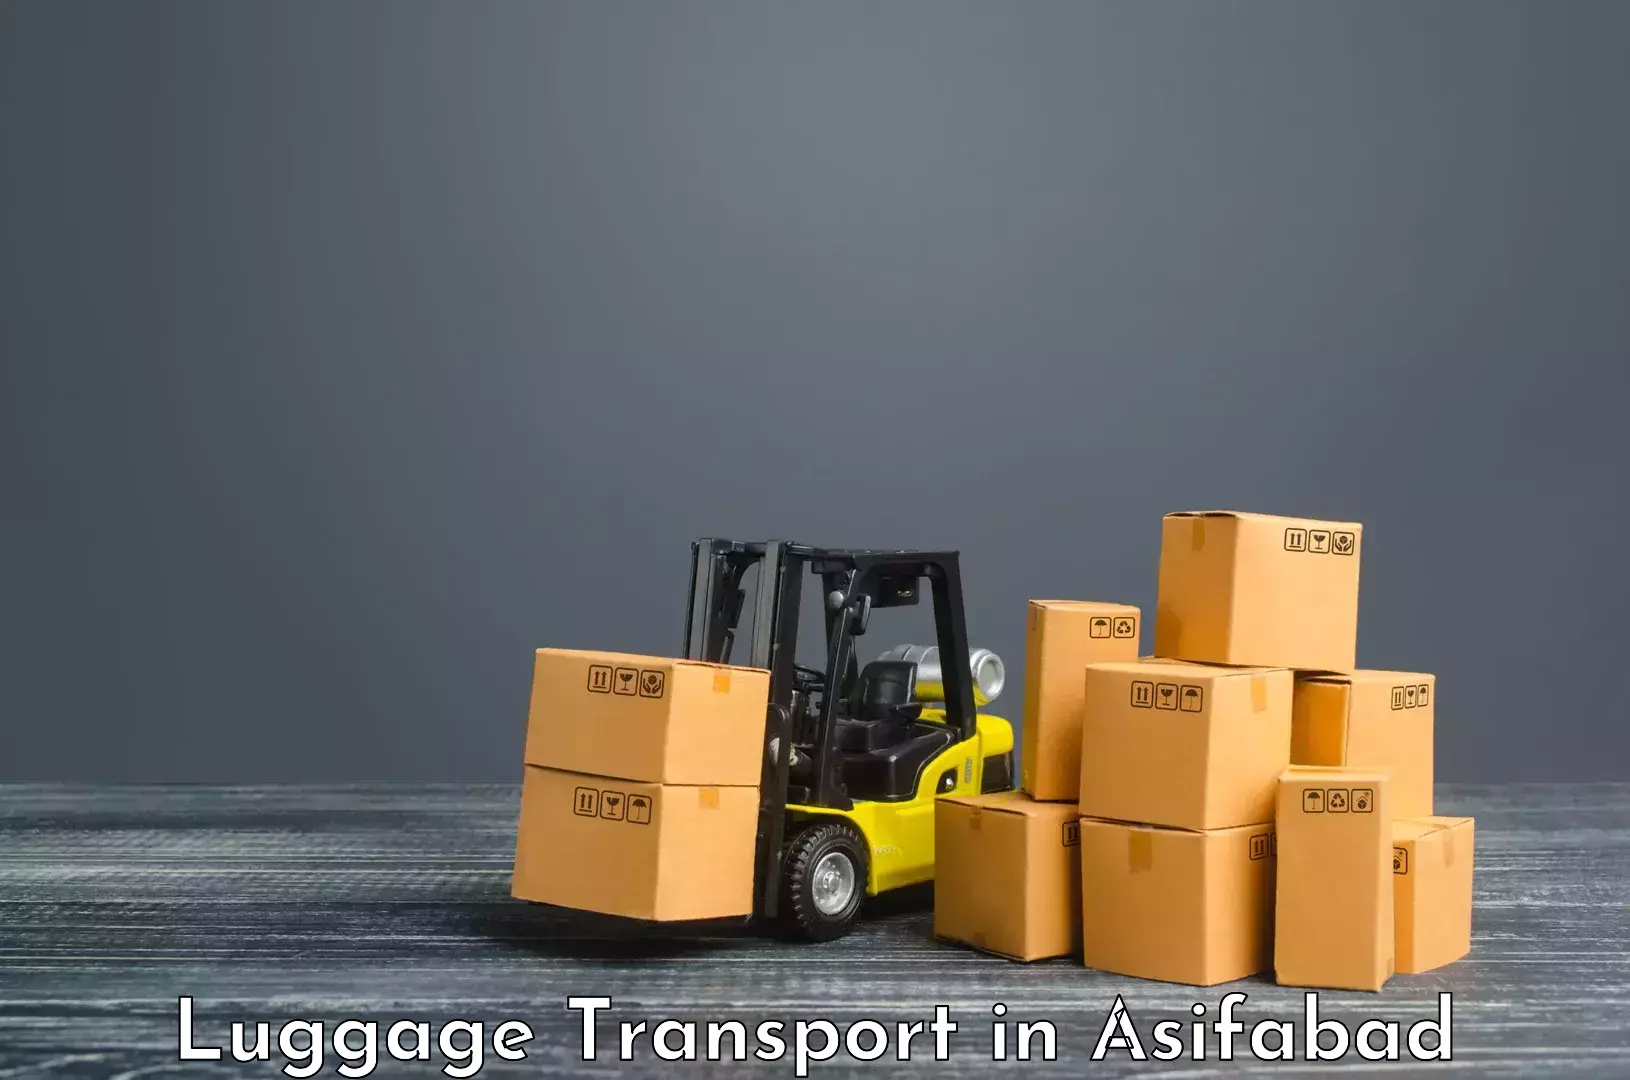 Business luggage transport in Asifabad